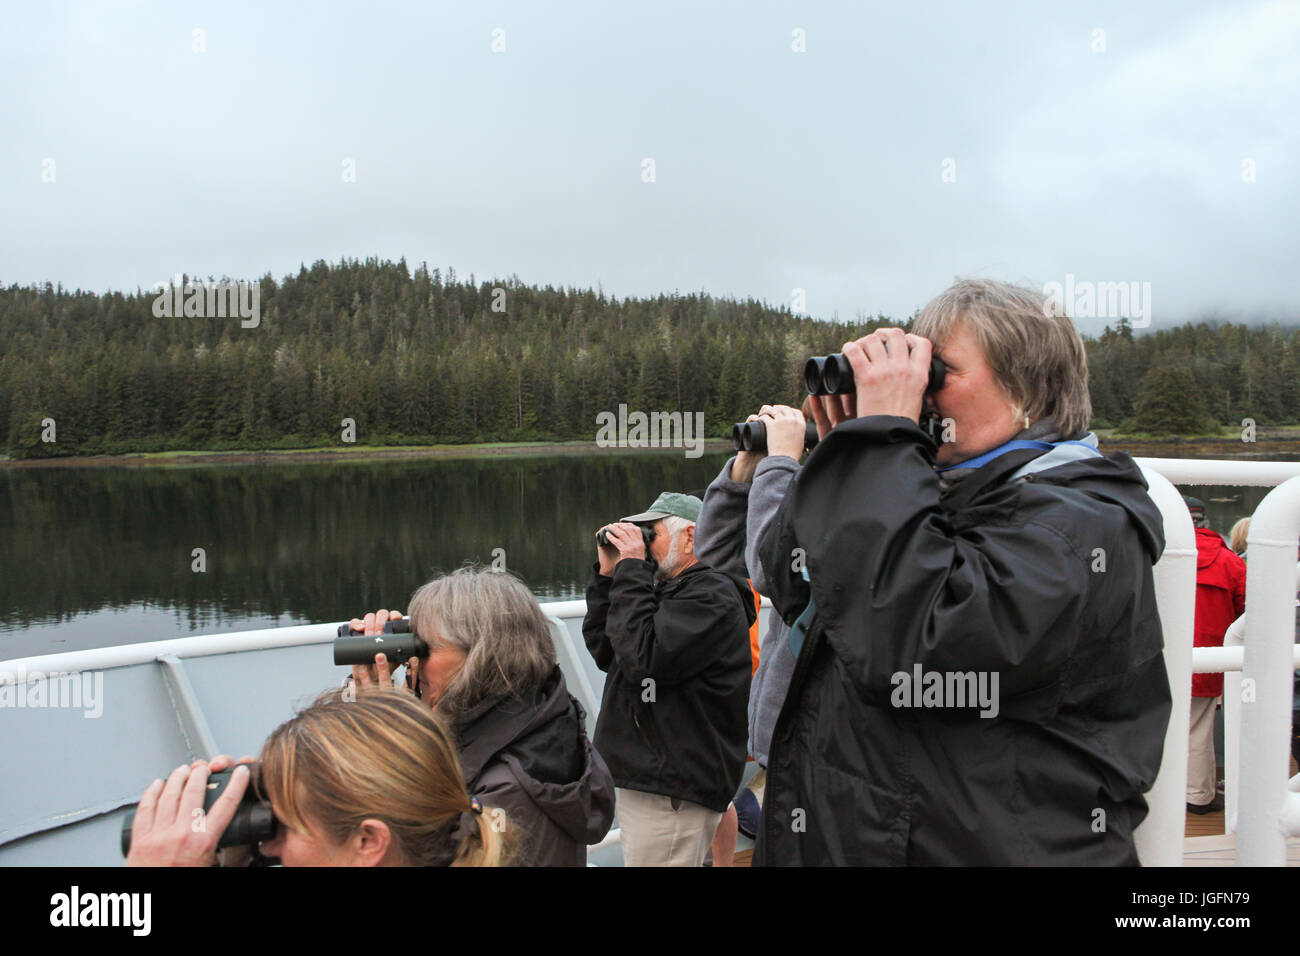 During an expedition on a cruise ship, passengers use binoculars to scan the landscape. Stock Photo